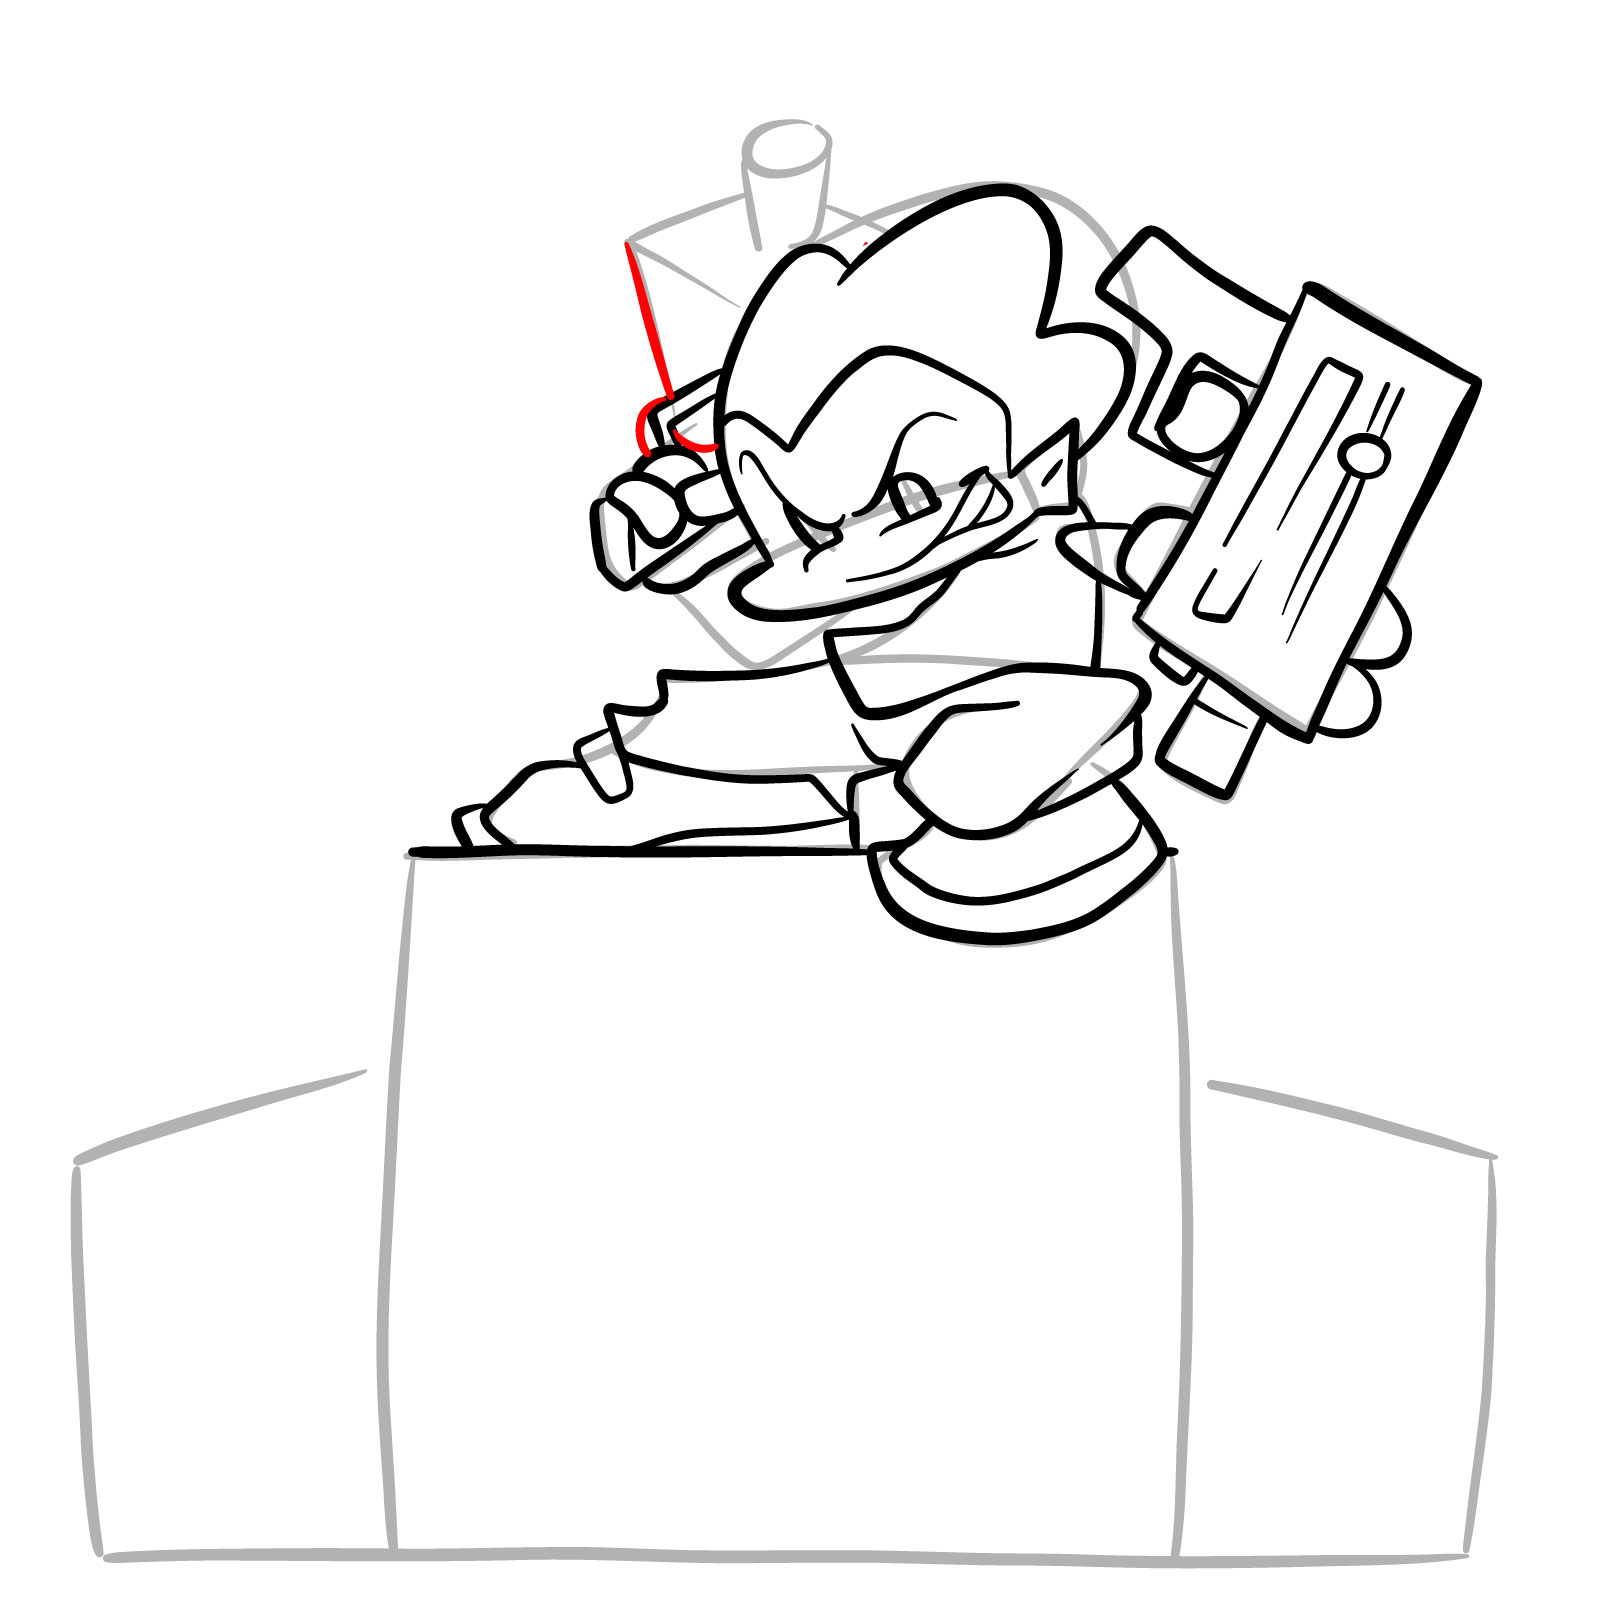 How to draw Pico on the speakers - step 22